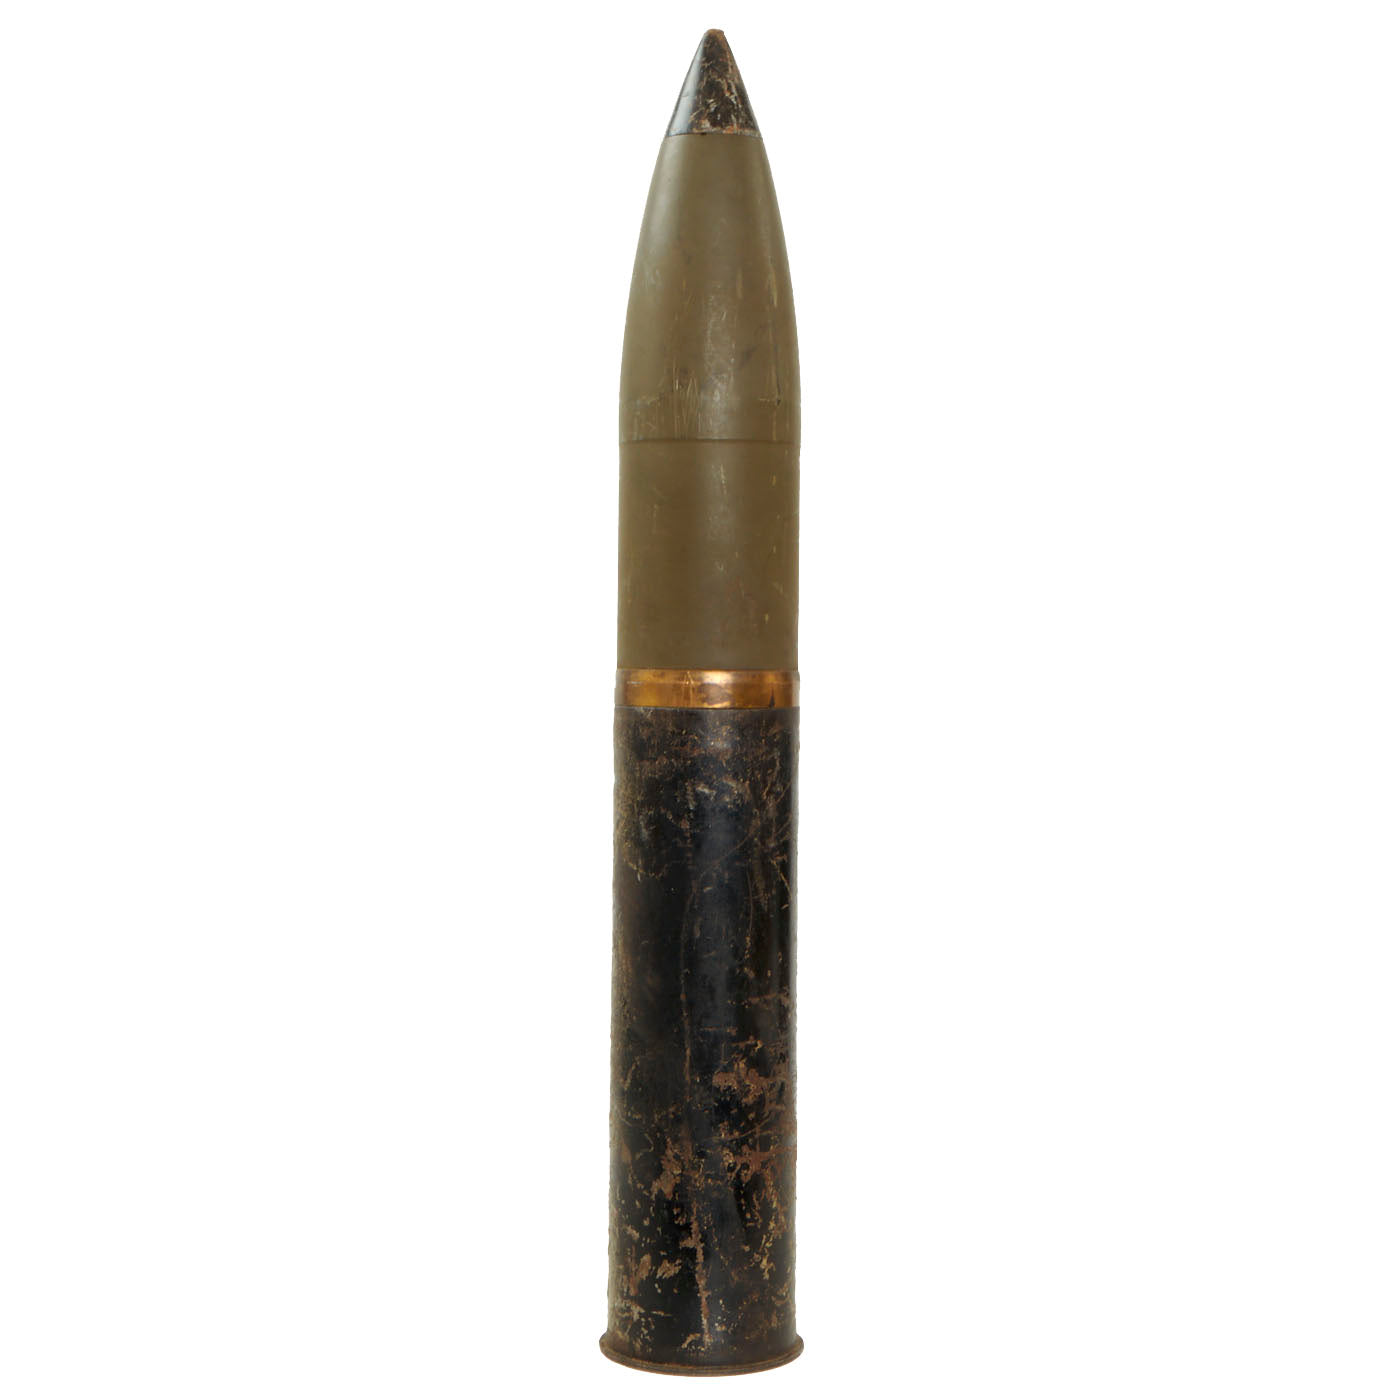 Sold at Auction: WWII - COLD WAR US & UK ARTILLERY SHELL CASINGS